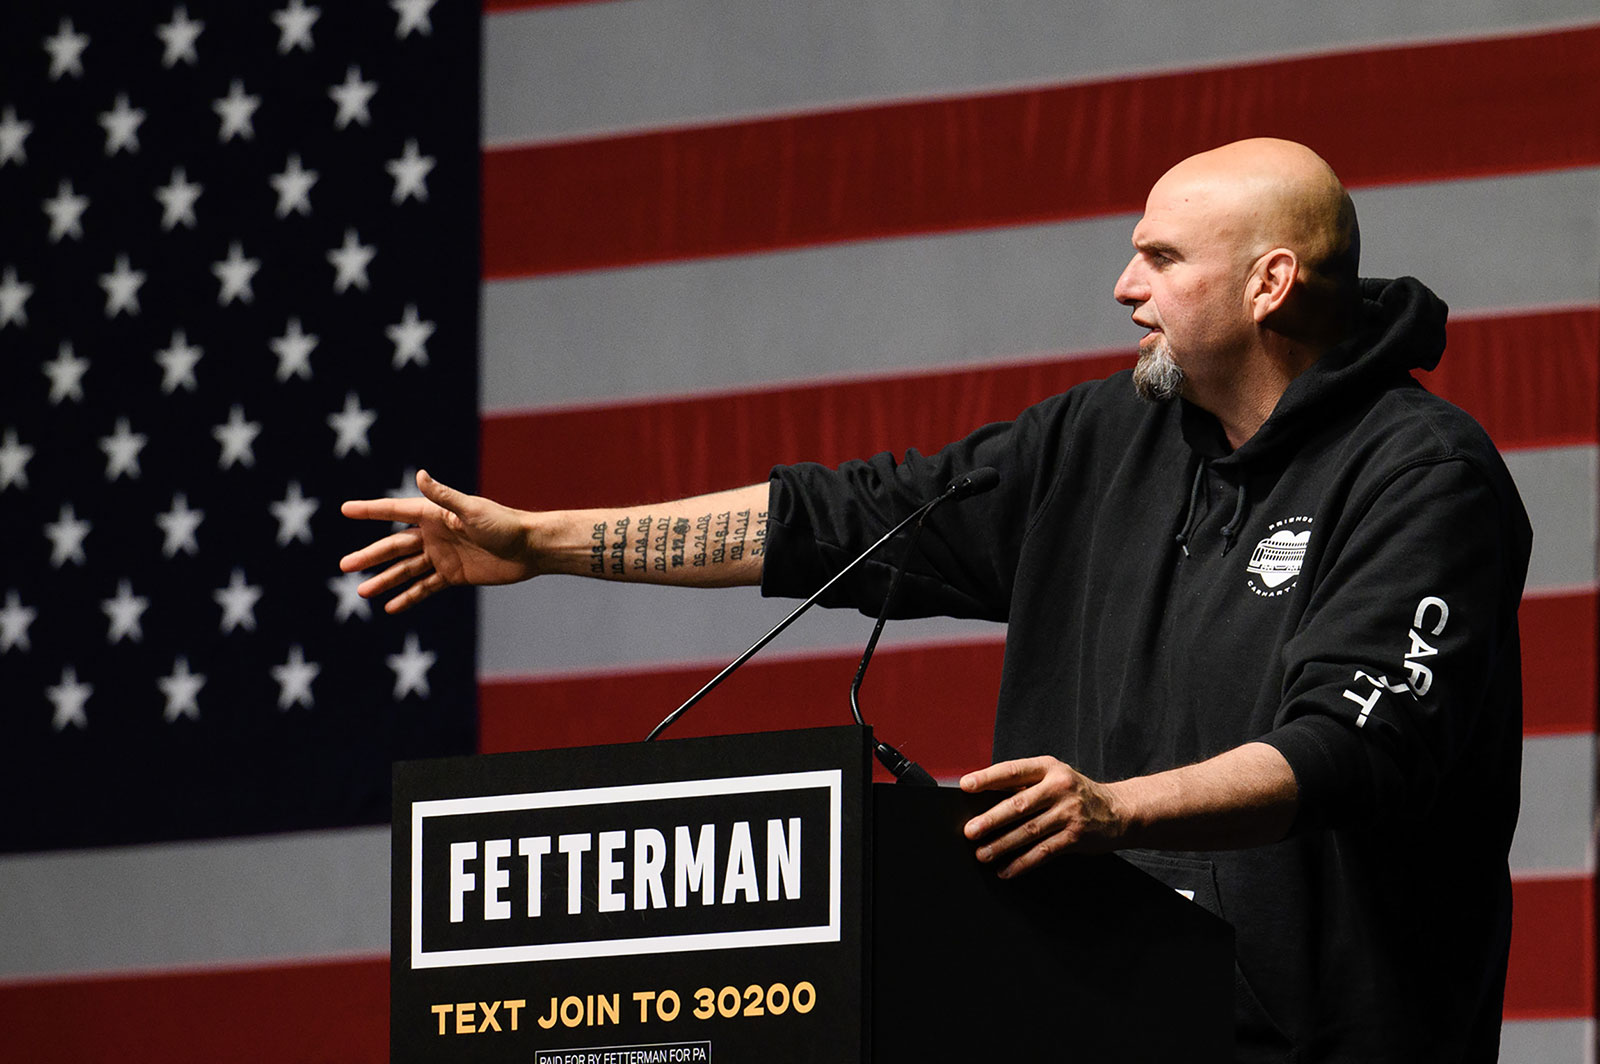 Pennsylvania Senate candidate John Fettman addresses supporters at an election night in Pittsburgh on Tuesday.